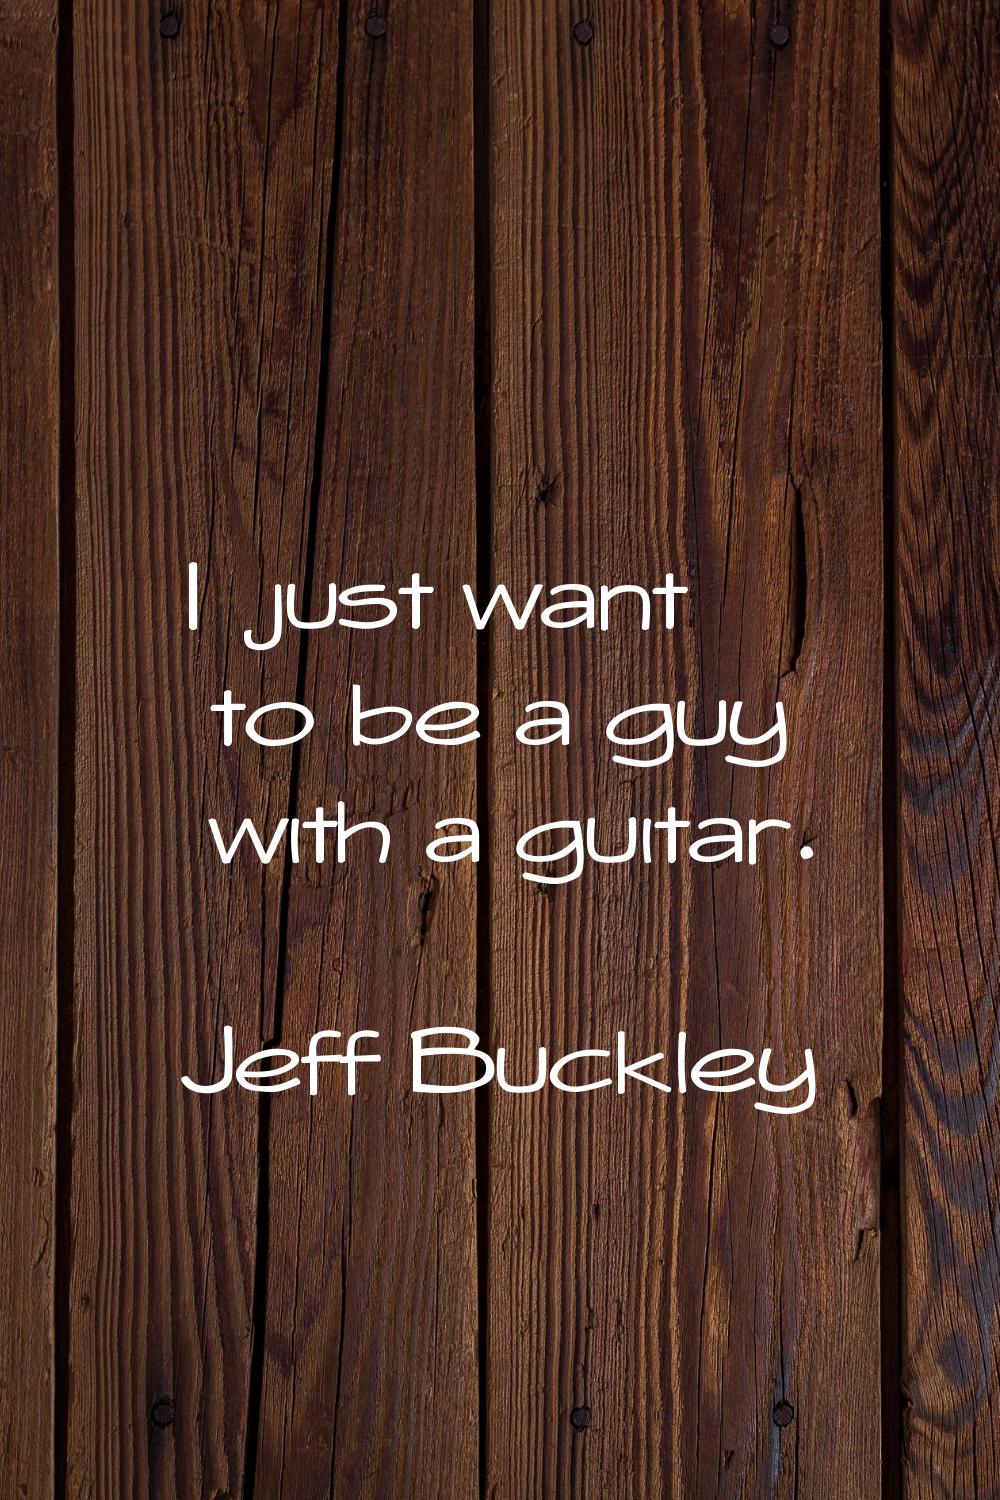 I just want to be a guy with a guitar.